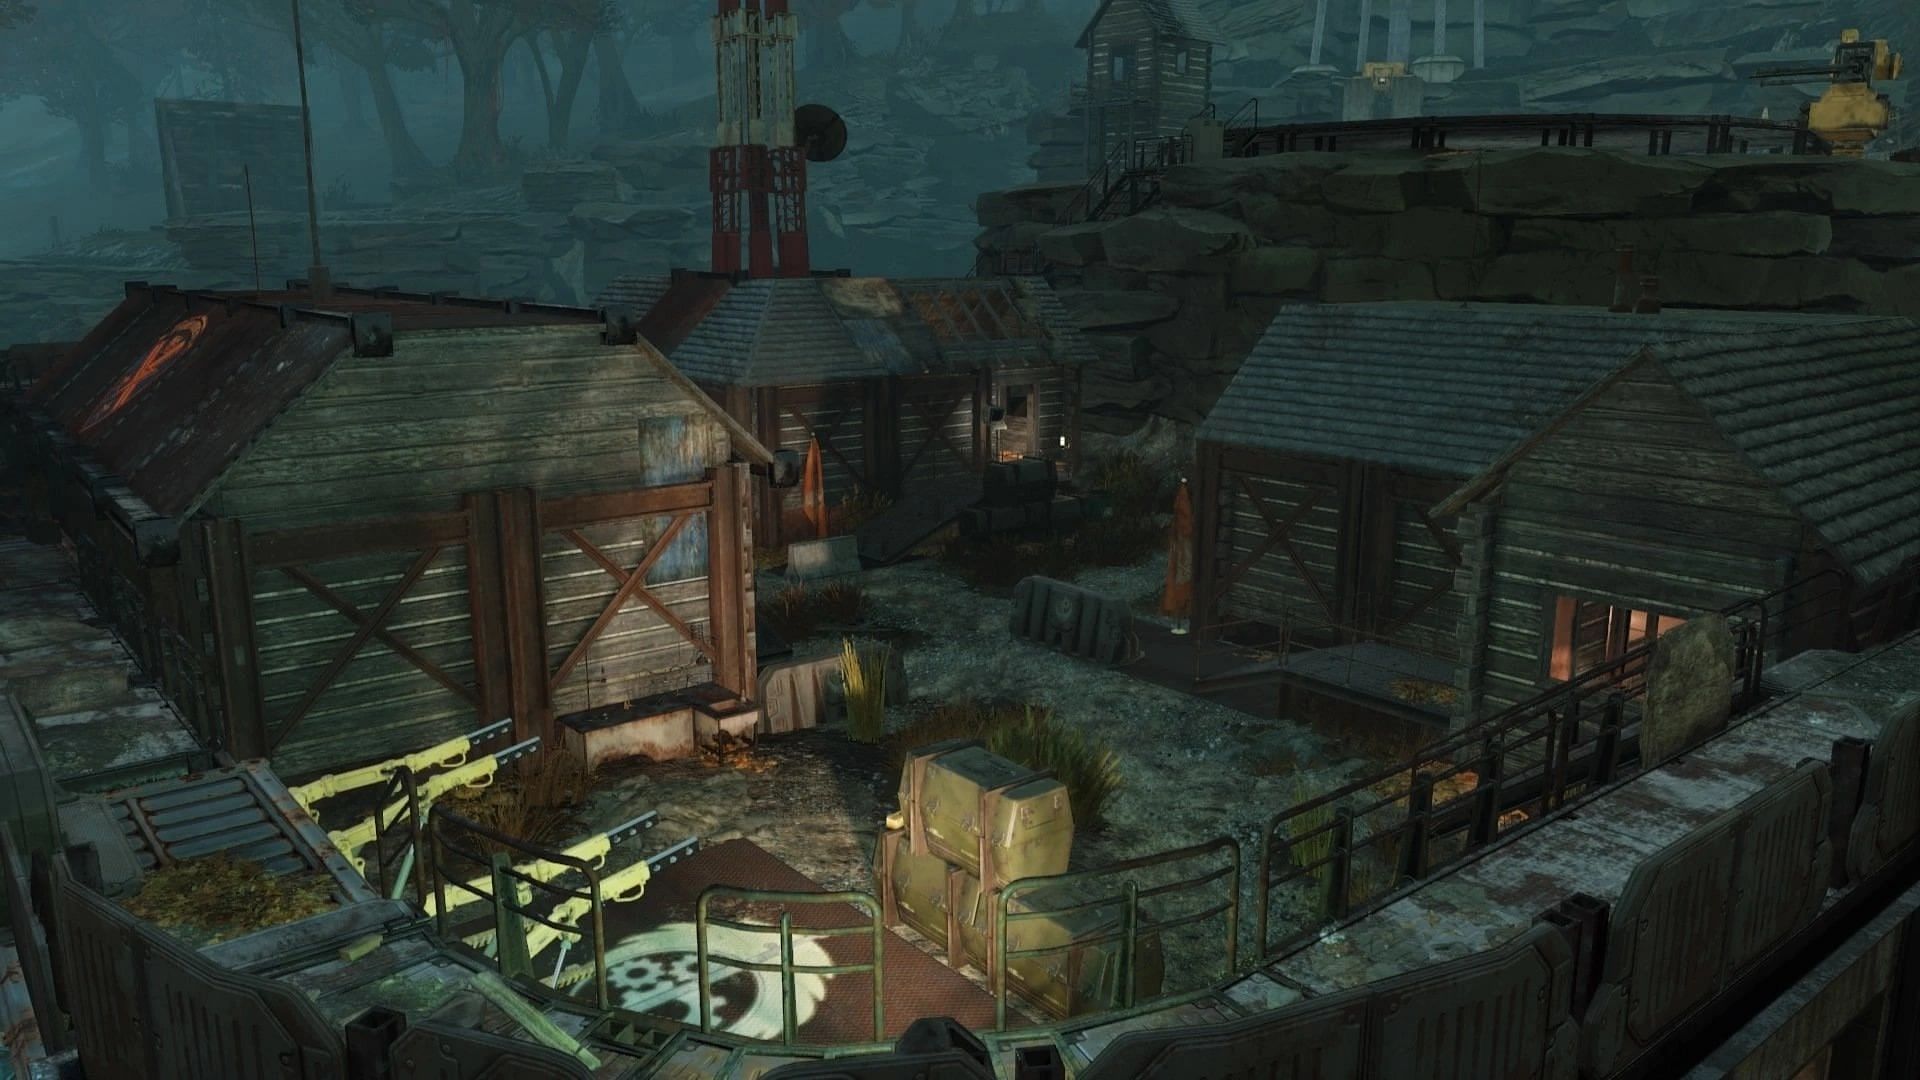 Camp Venture as it appears in Fallout 76 (Image via Bethesda)